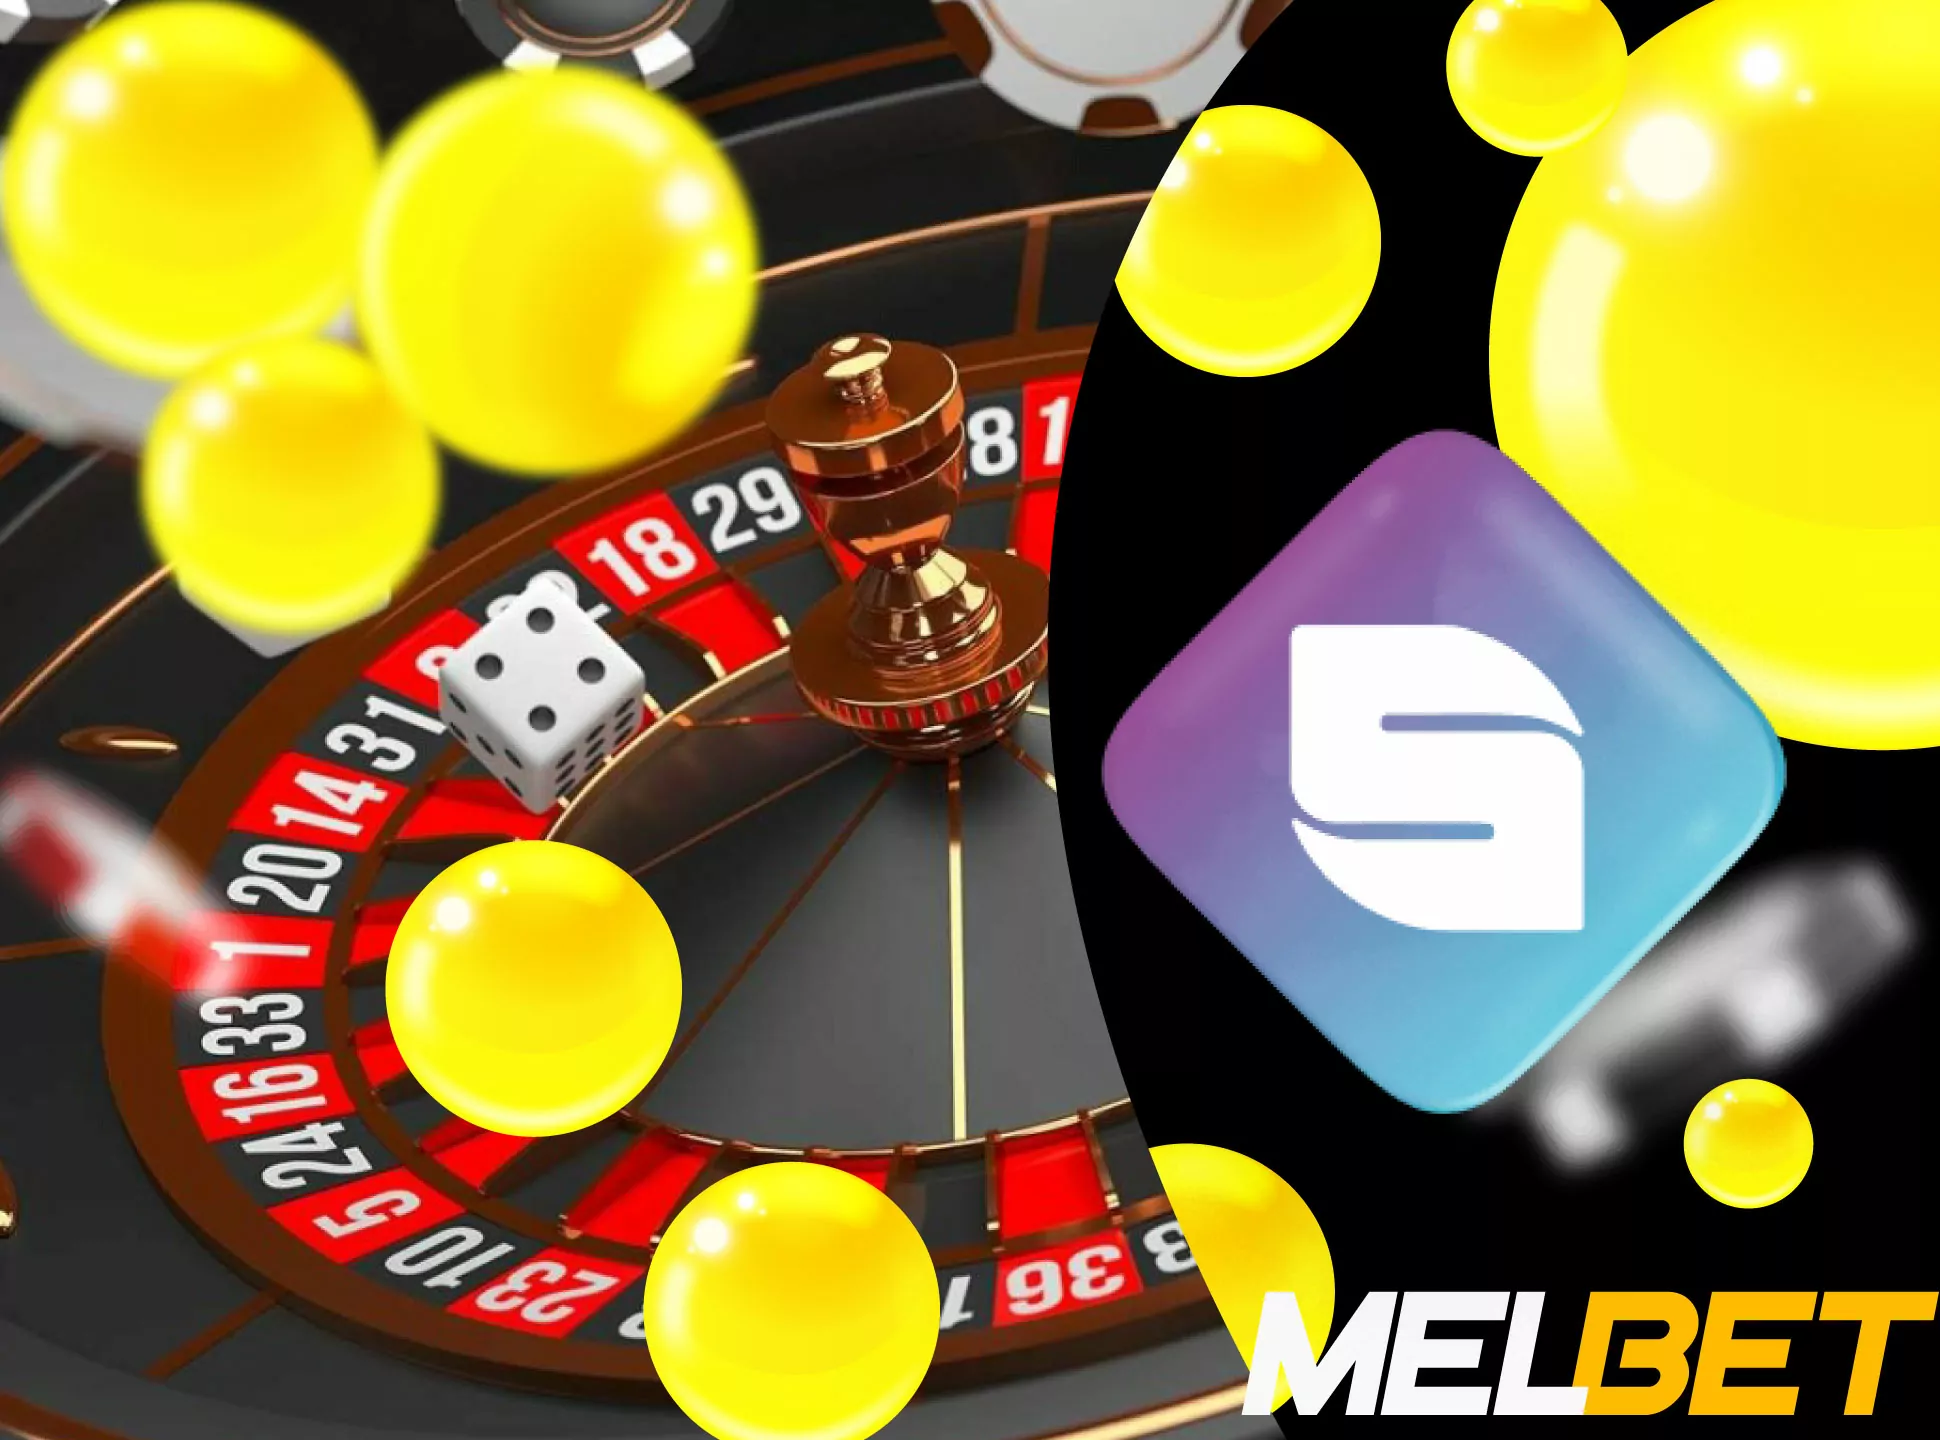 Spinomenal is famous casino games provider.